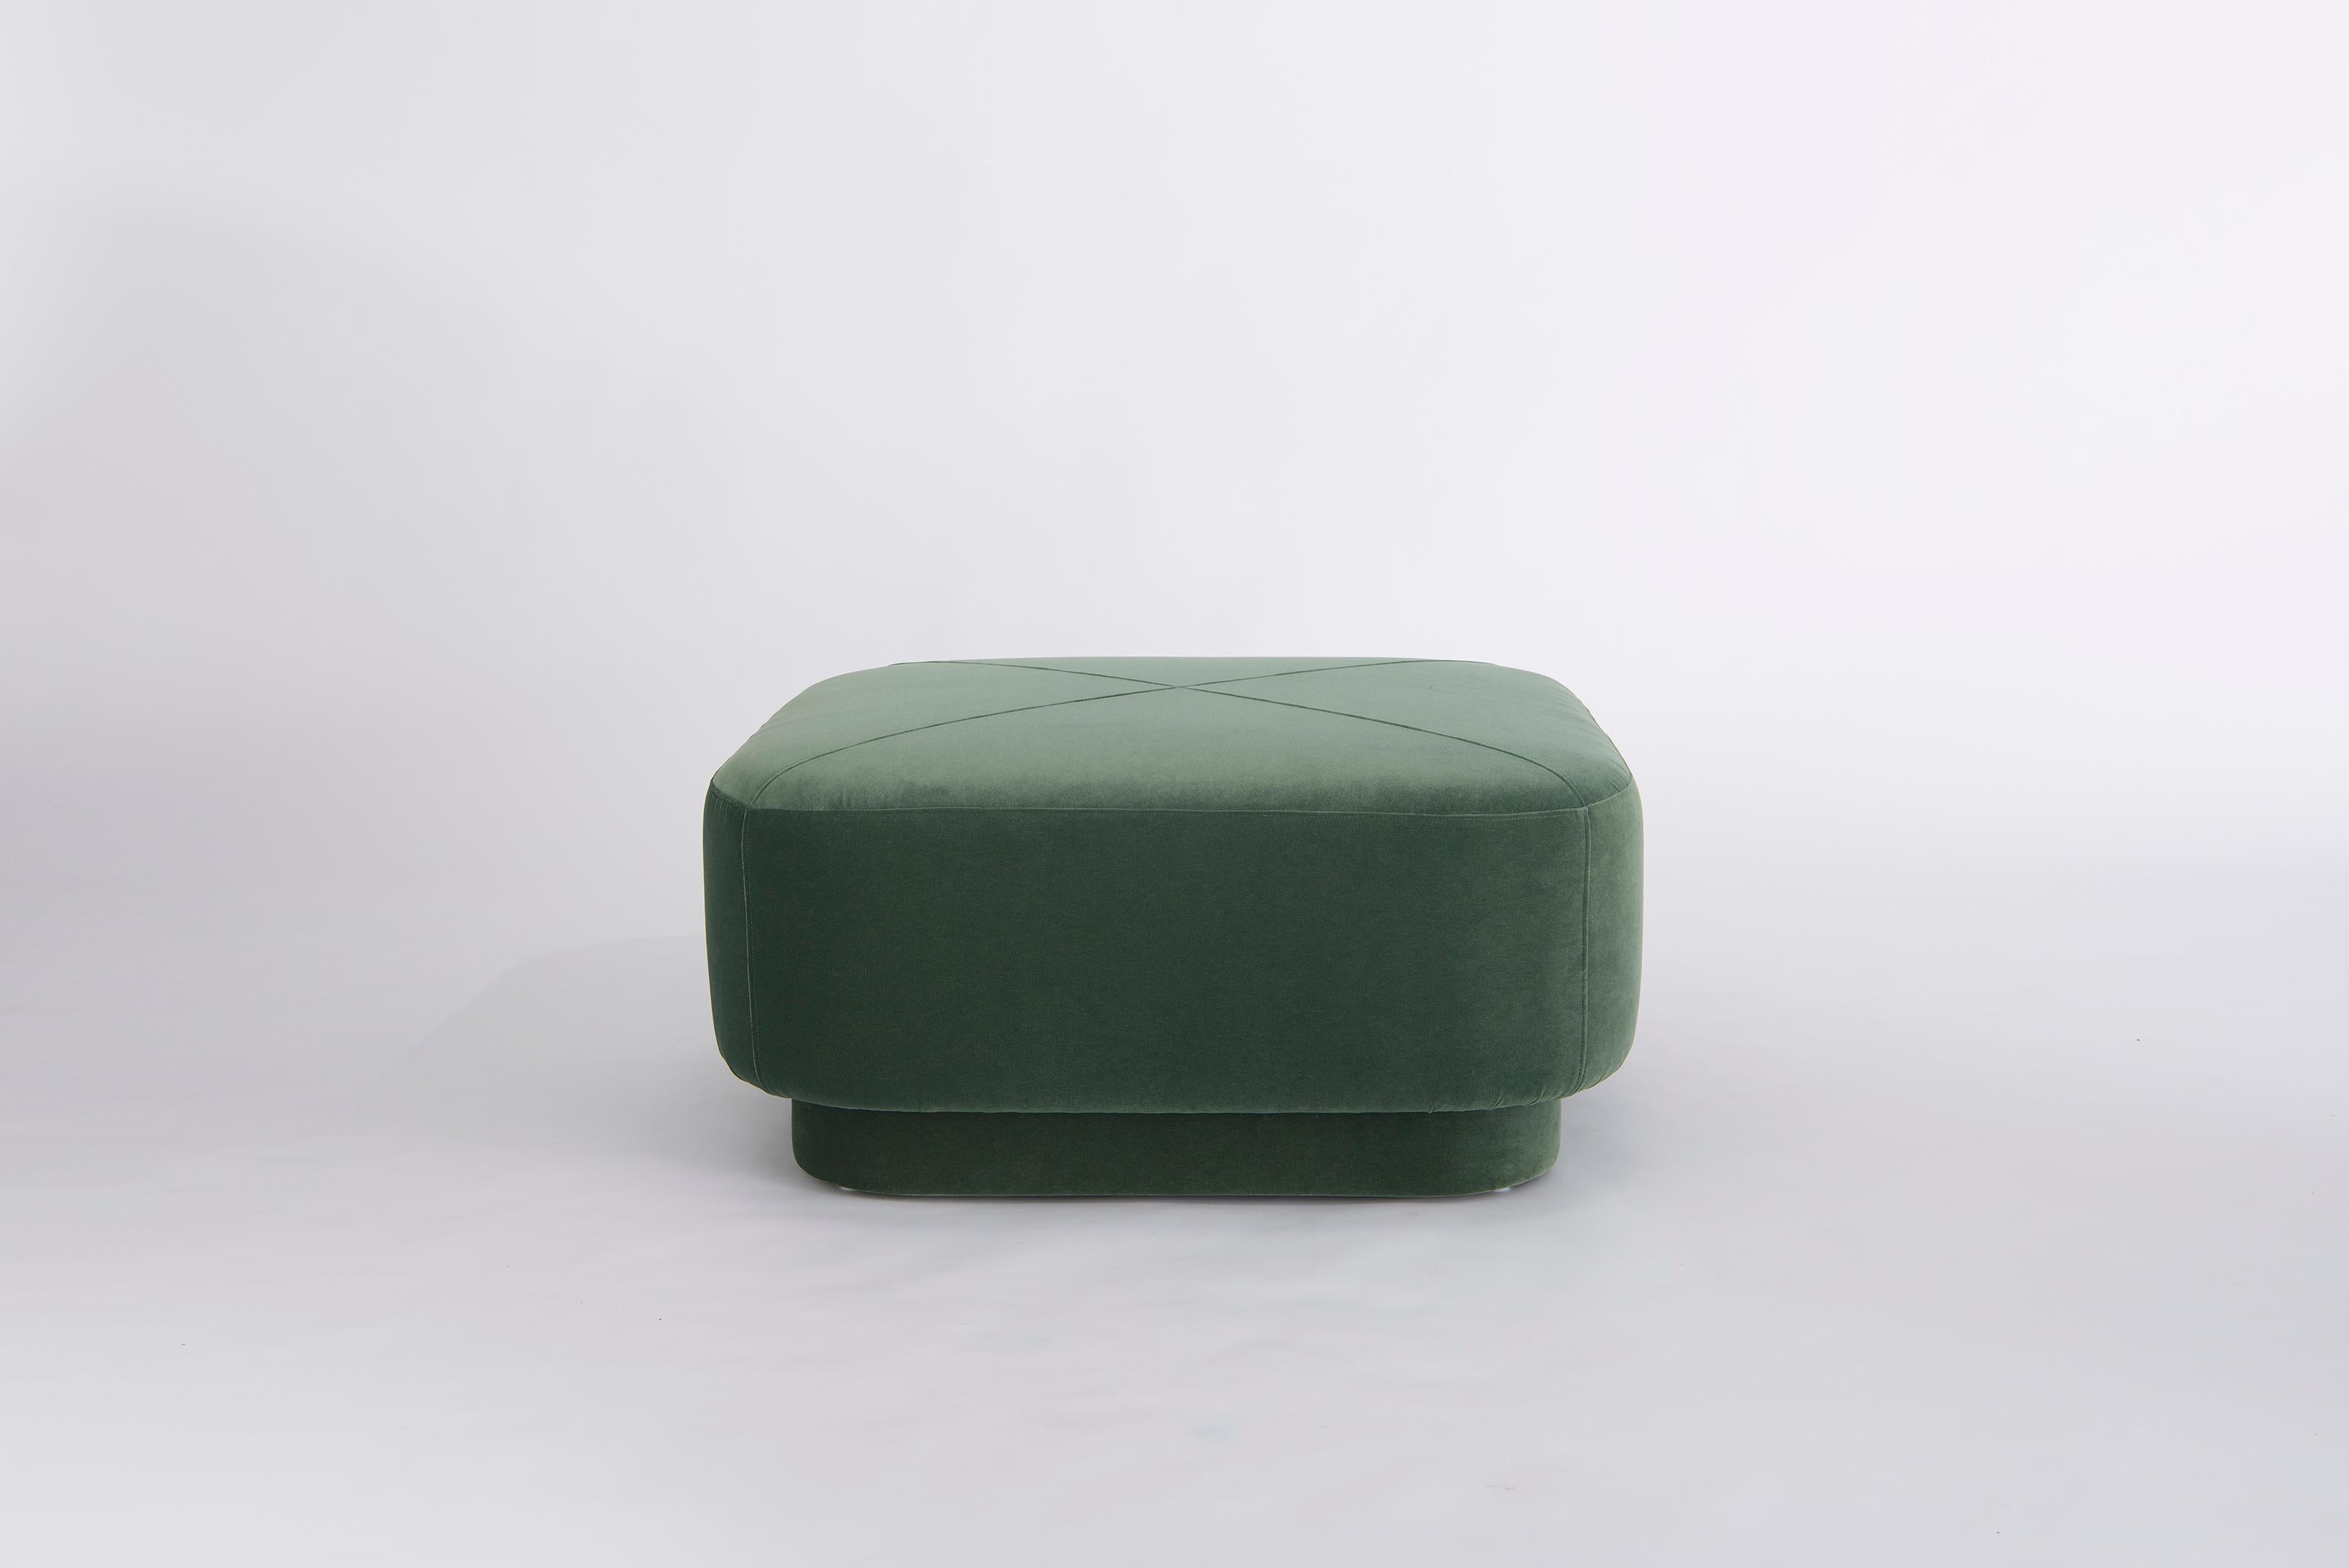 Capper Medium Ottoman by Phase Design
Dimensions: D 96,5 x W 96,5 x H 40,6 cm. 
Materials: Upholstery and wood.

Wood construction with upholstered body. Upholstery may be sourced in Customer Own Material (COM), Customer Own Leather (COL), or in